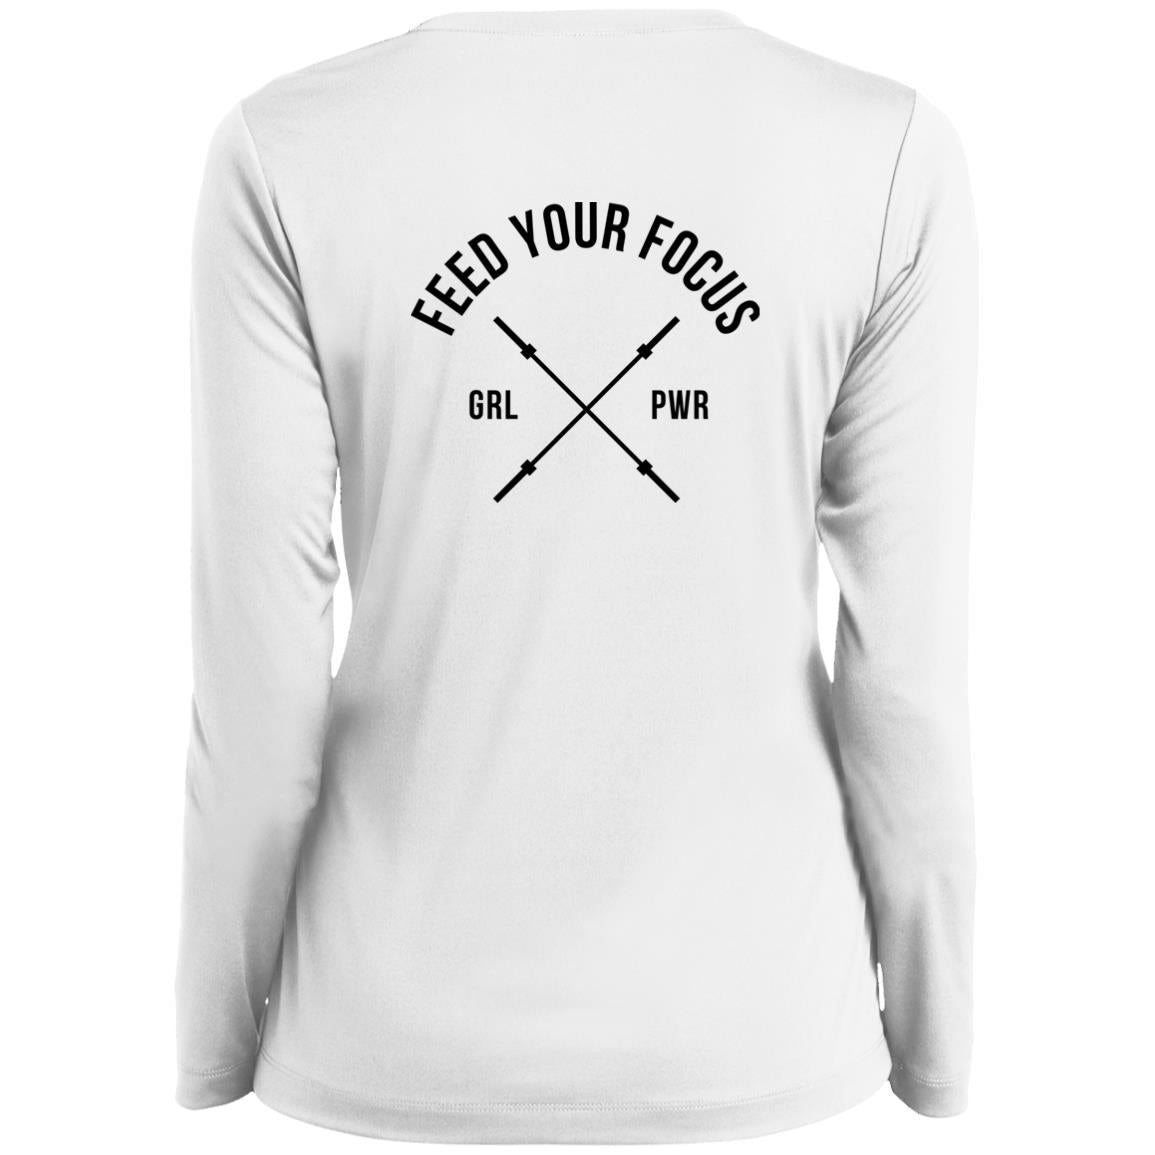 Feed Your Focus 2 Long Sleeve Performance V-Neck Tee - women's